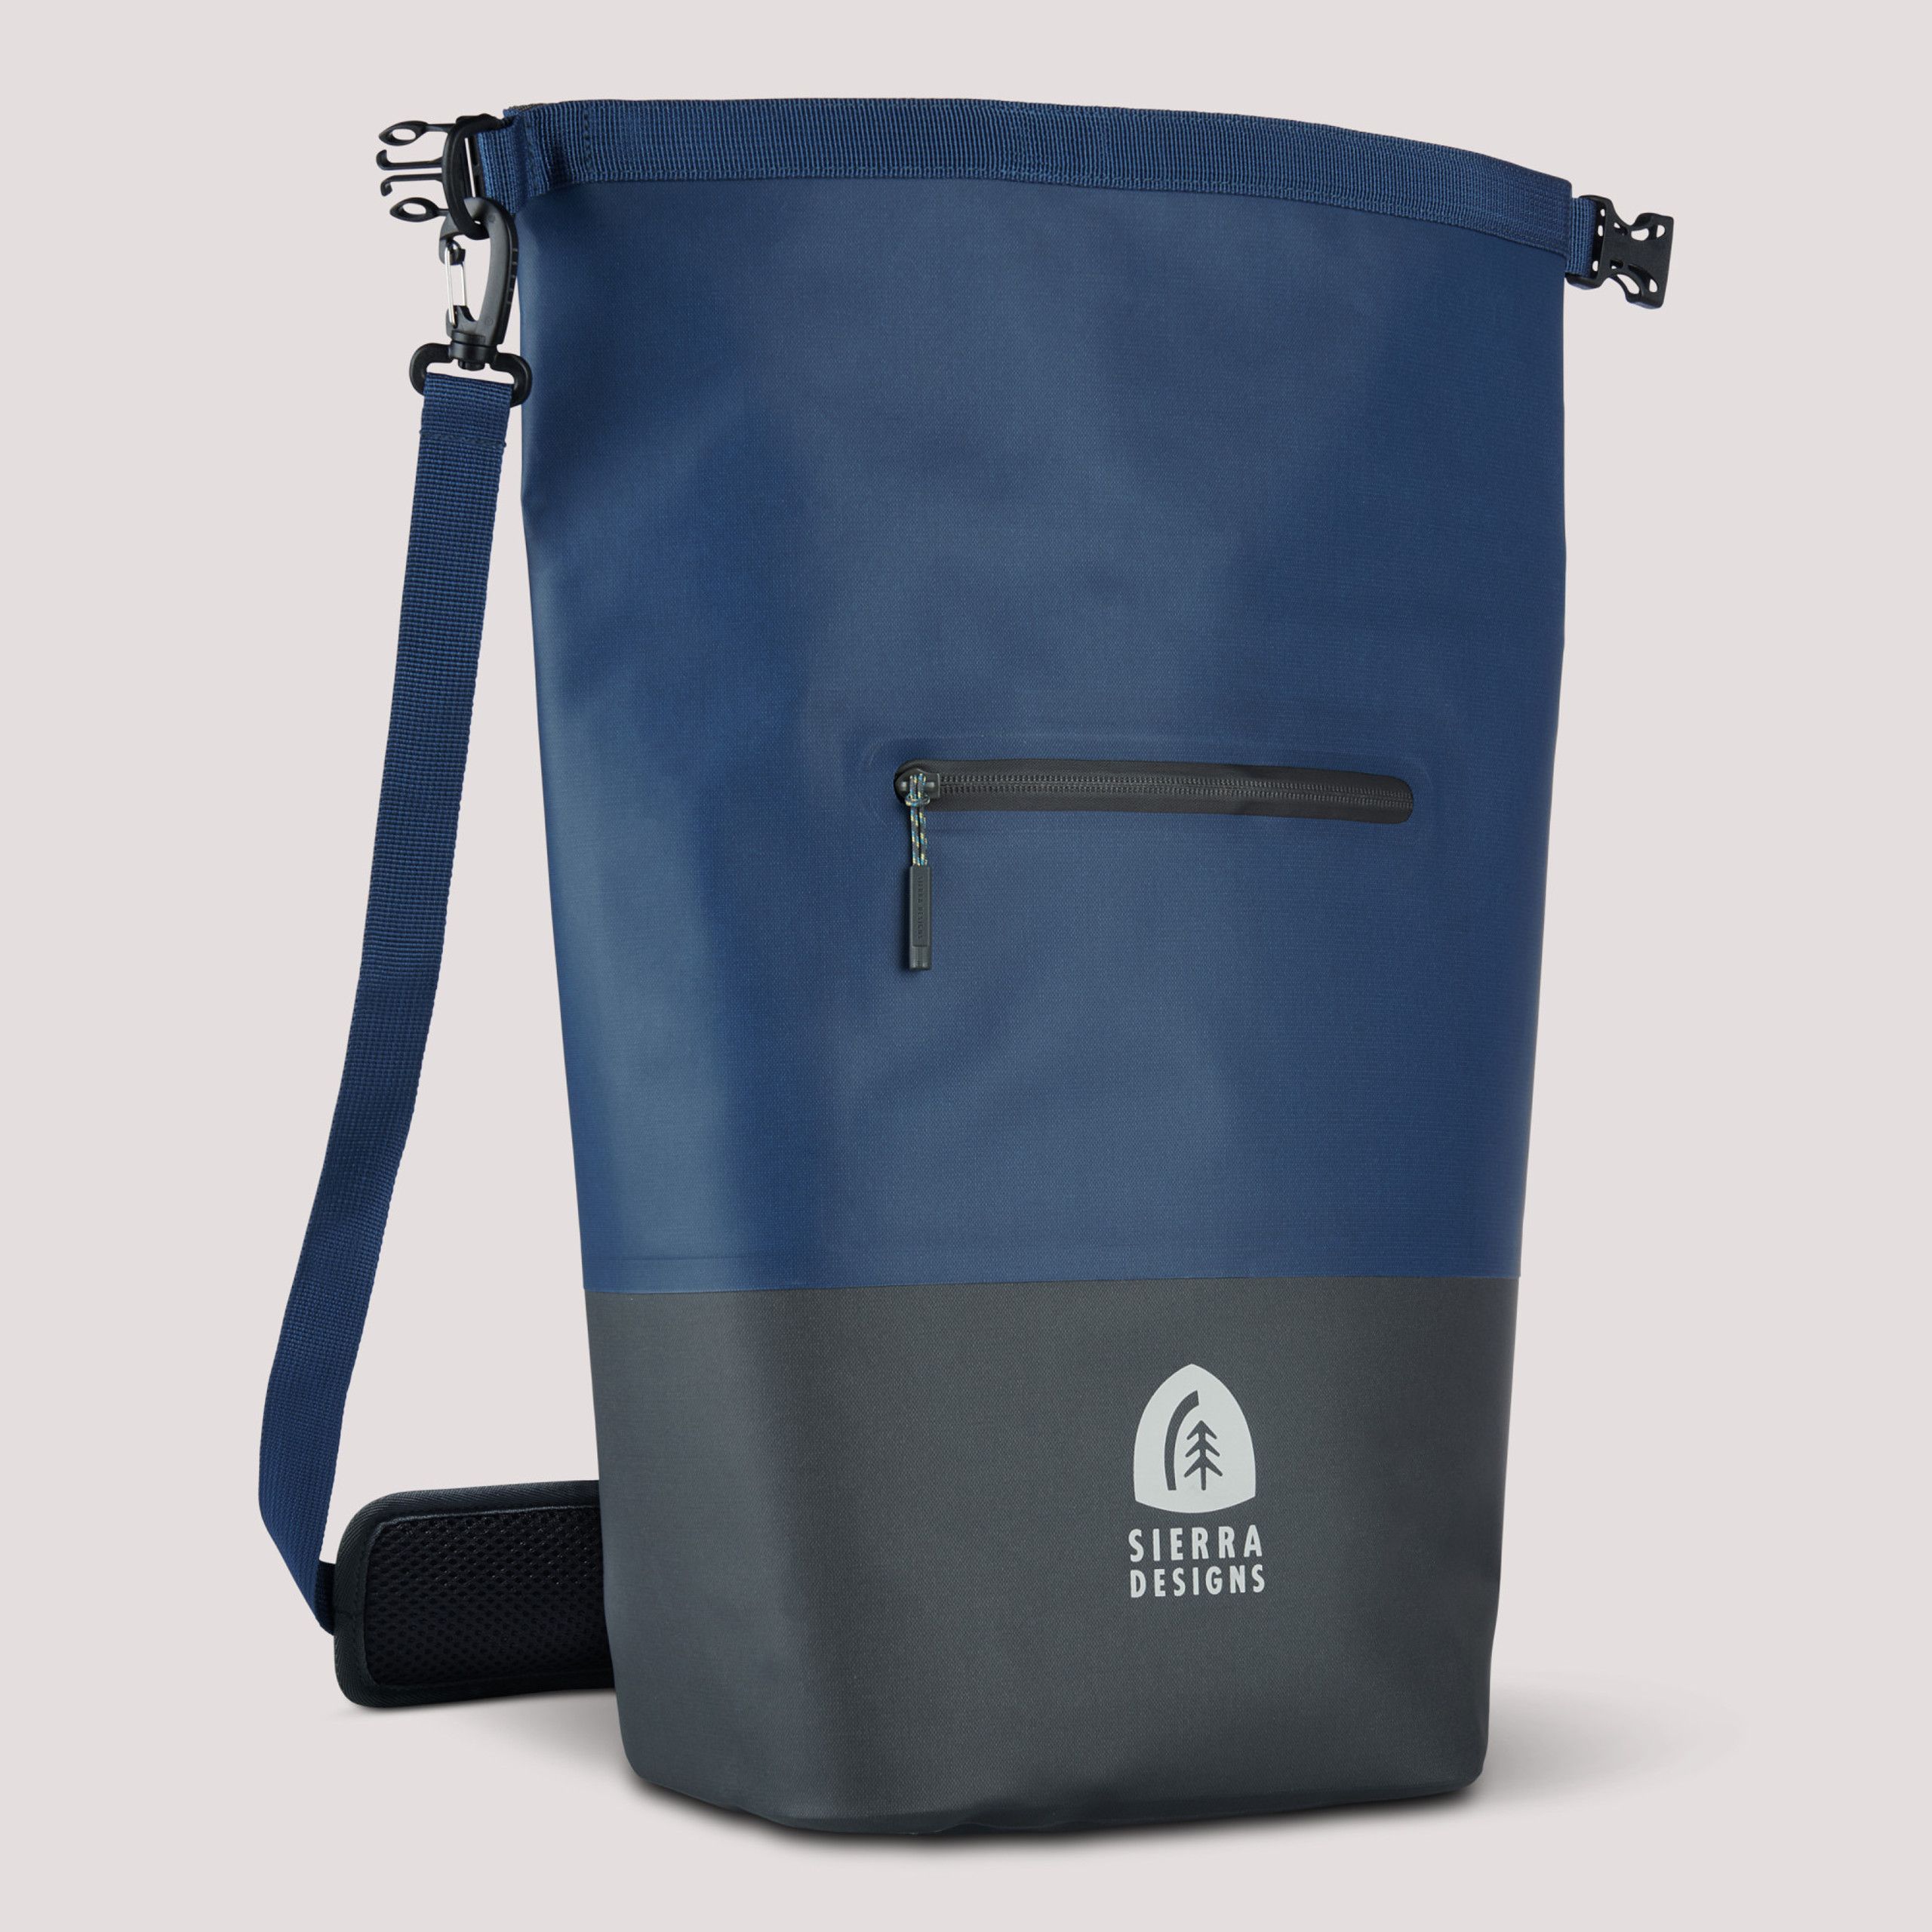 <p><strong>$69.95</strong></p><p><a href="https://sierradesigns.com/grotto-15l-cooler-sling/">Shop Now</a></p><p>Shopping for someone who never lets a summer go by without making at least one trip to the lake or beach? Gift them with the convenience of a cold drink even when it’s 95 degrees outside. The Grotto Sling Cooler is a hands-free (and waterproof) way to carry up to 20 cans, keeping drinks cold for hours. </p><p>While there are plenty of trendy cooler brands in the outdoor world, the Sling Cooler is best for travel since it packs flat, making it easy to fit in even the most overpacked of family minivans.</p>